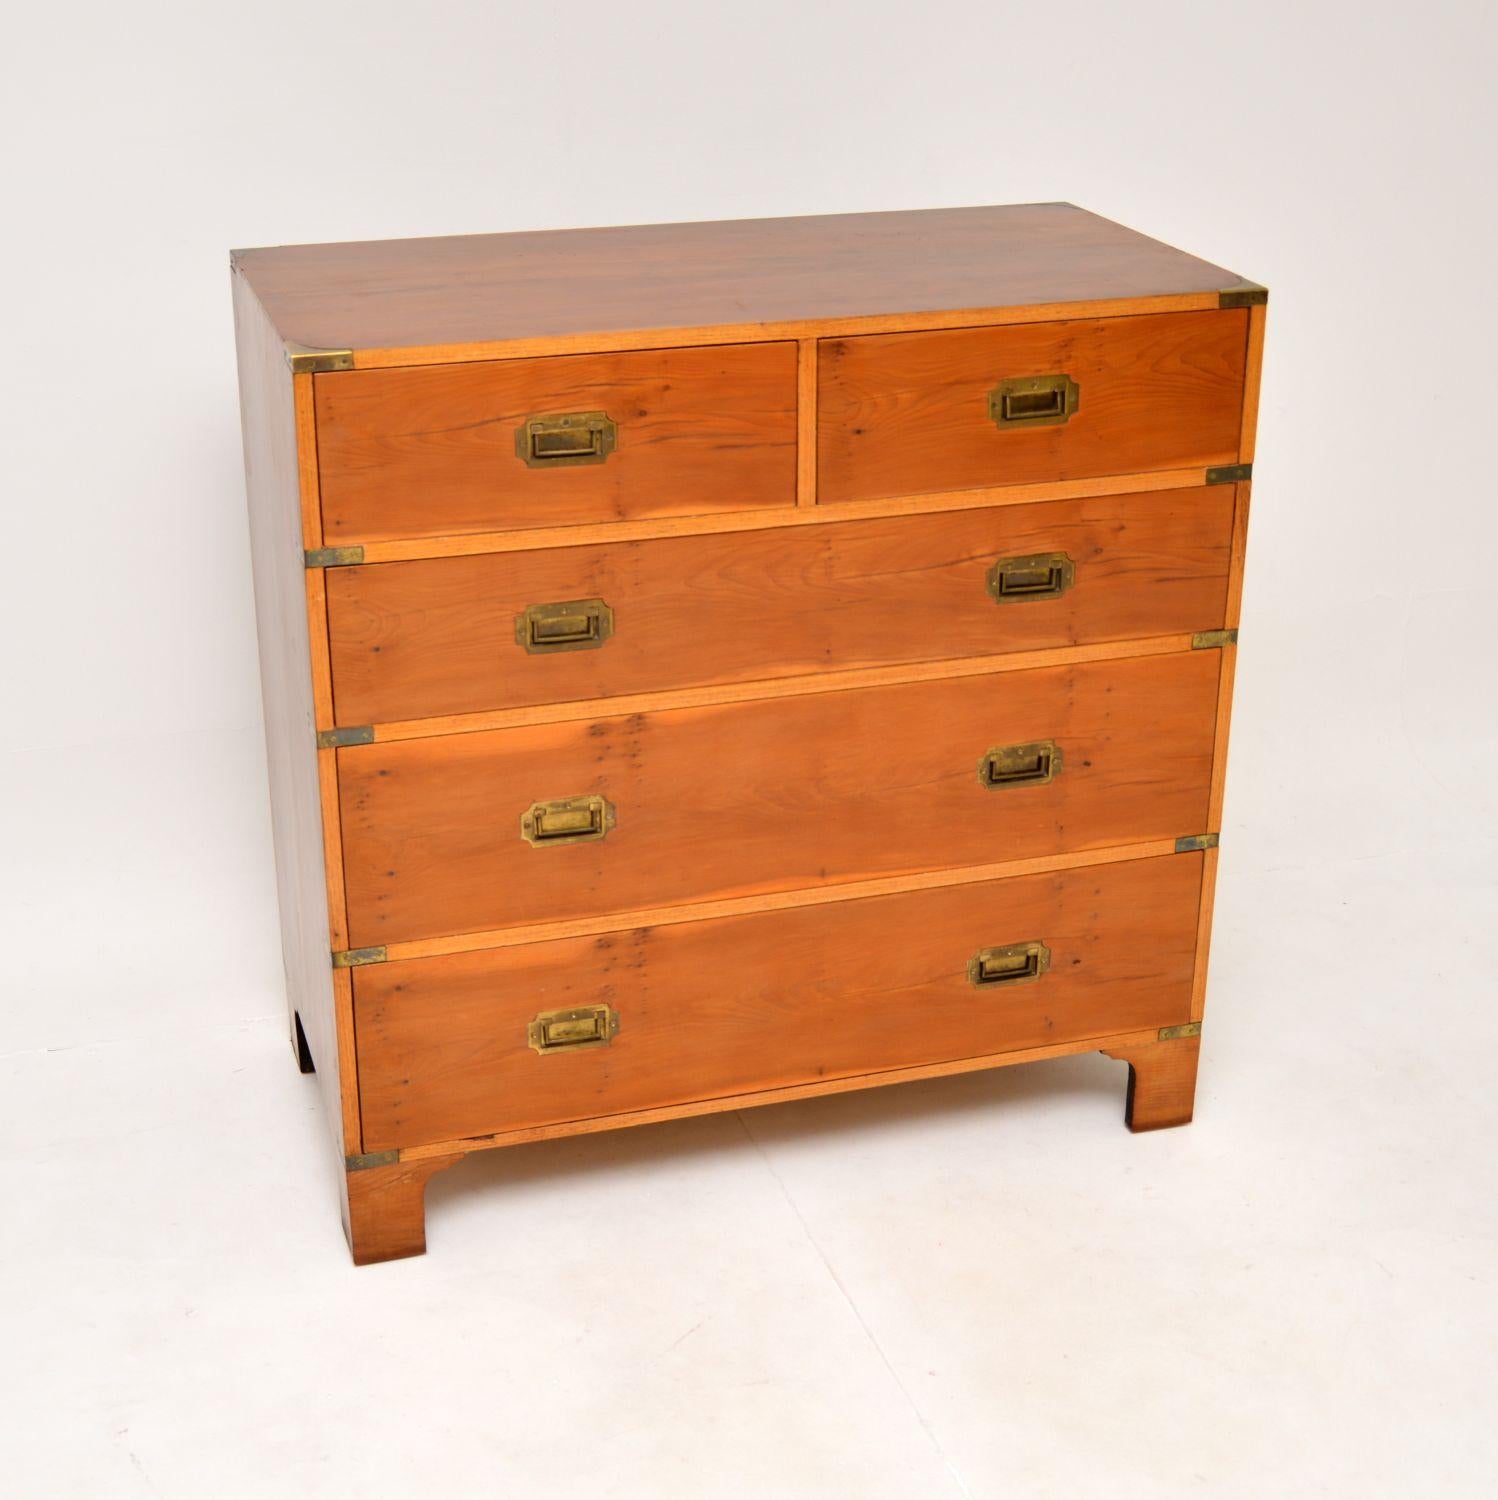 A fantastic antique military campaign style chest of drawers in yew wood. This was made in England, it dates from around the 1950’s.

It is really nice quality and is a very useful size. The yew wood has a lovely colour tone and grain patterns, this